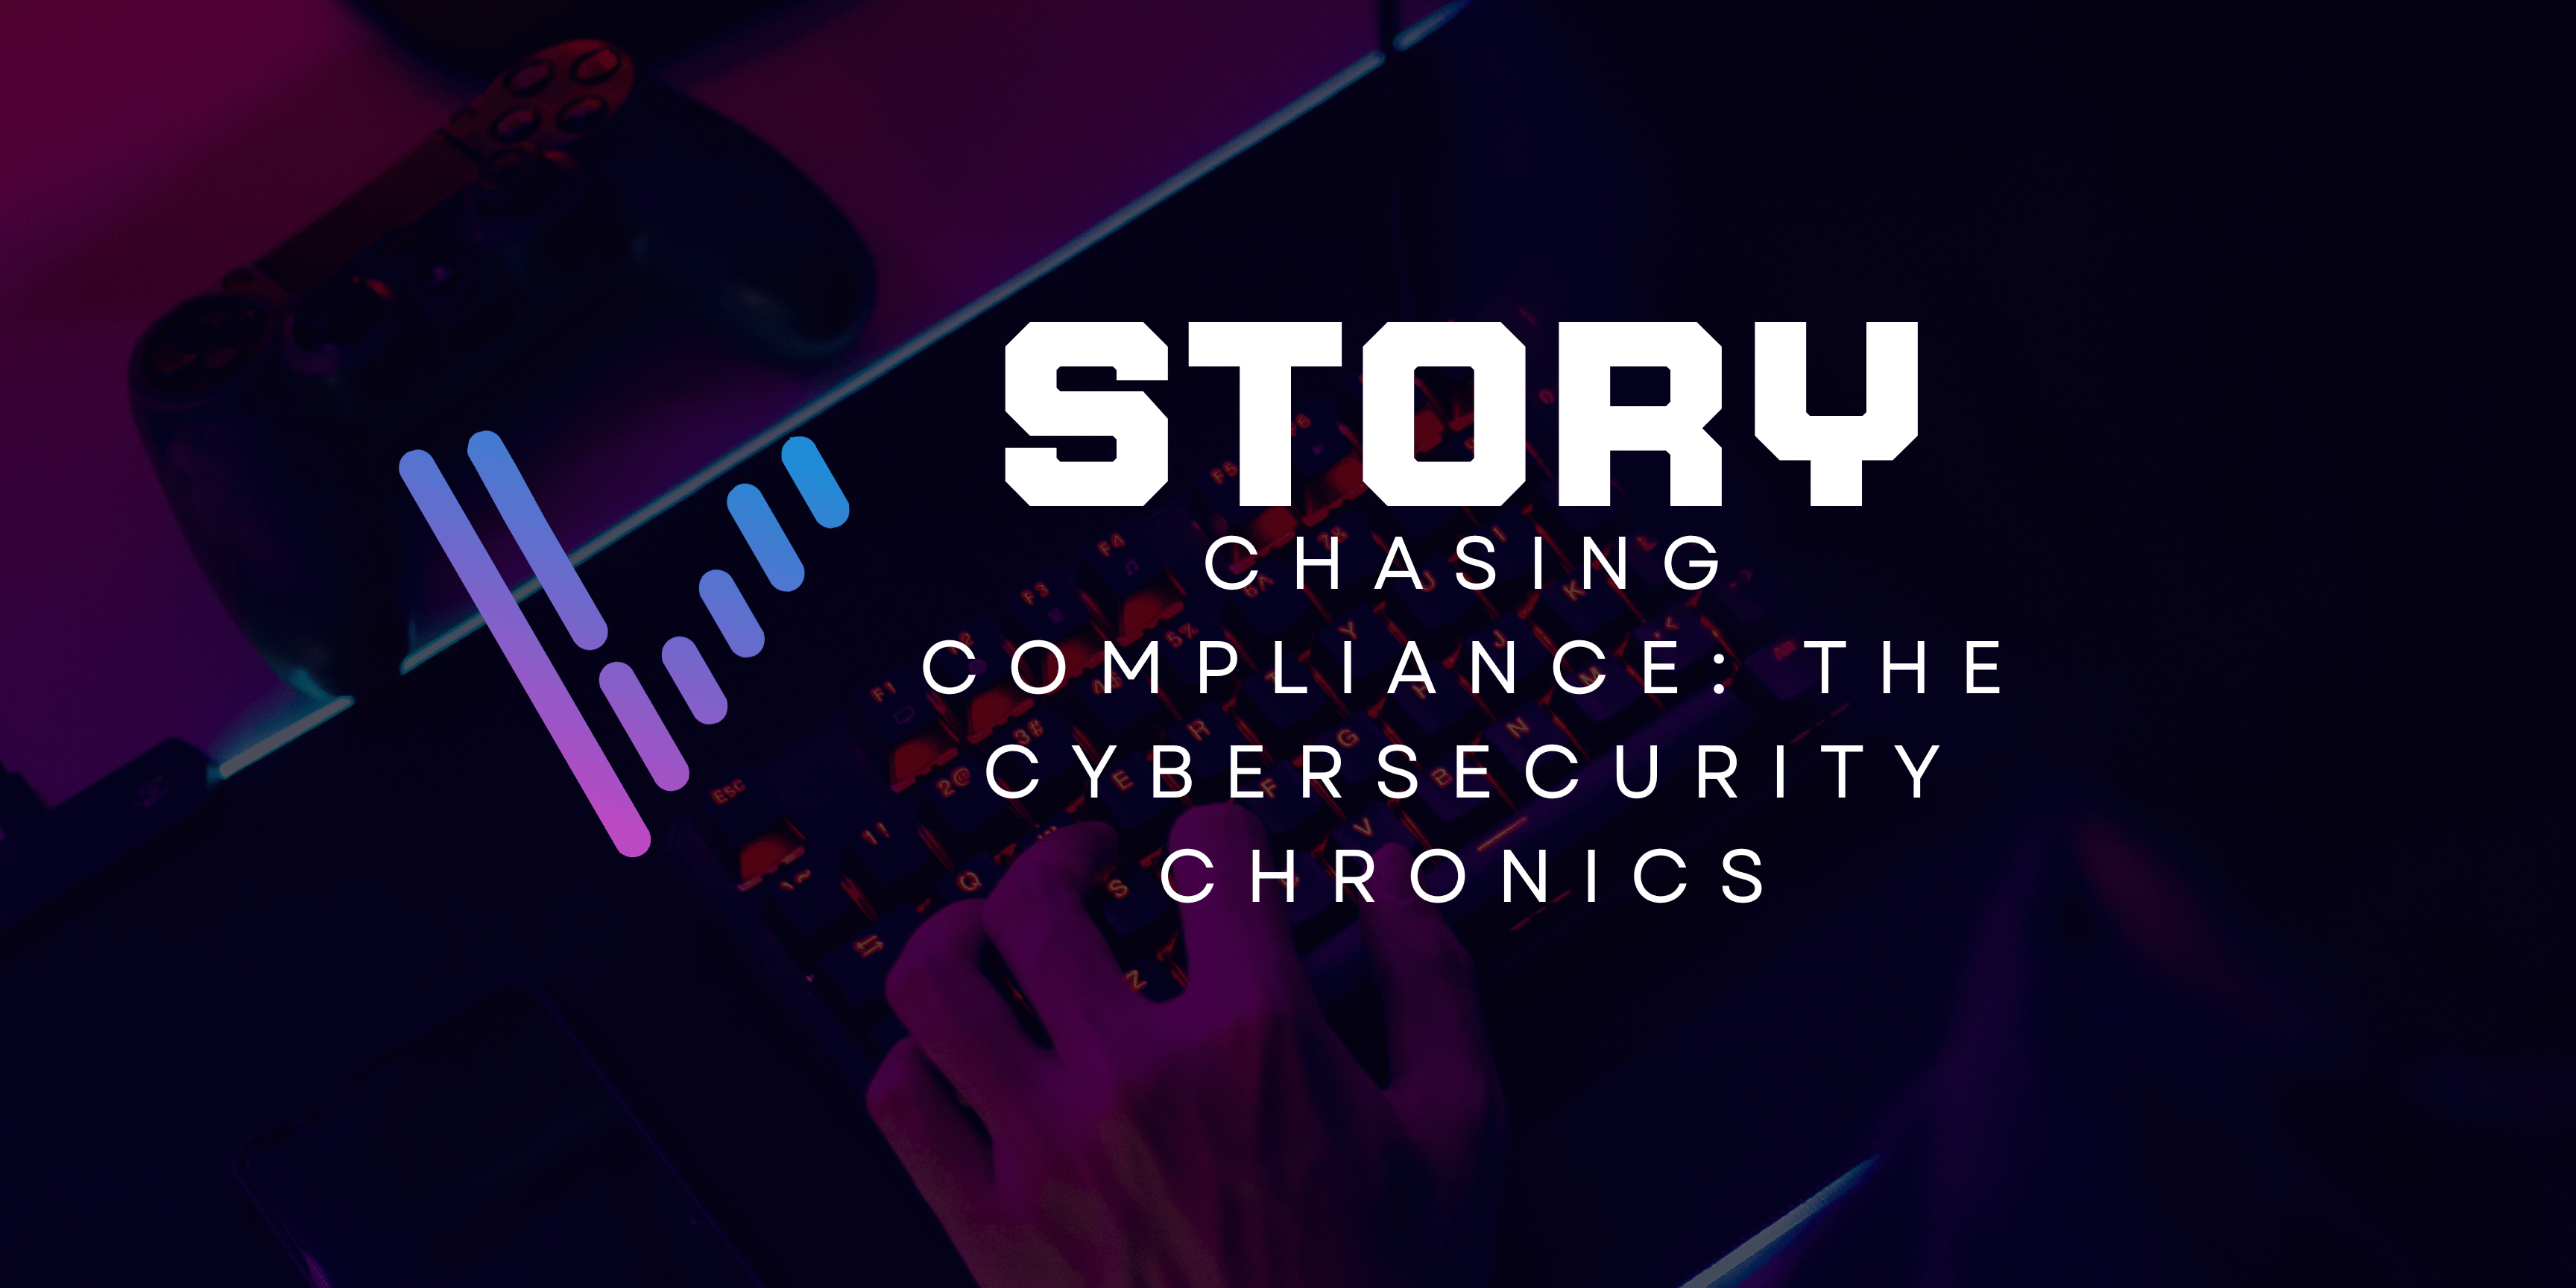 Chasing Compliance: The Cybersecurity Chronicle